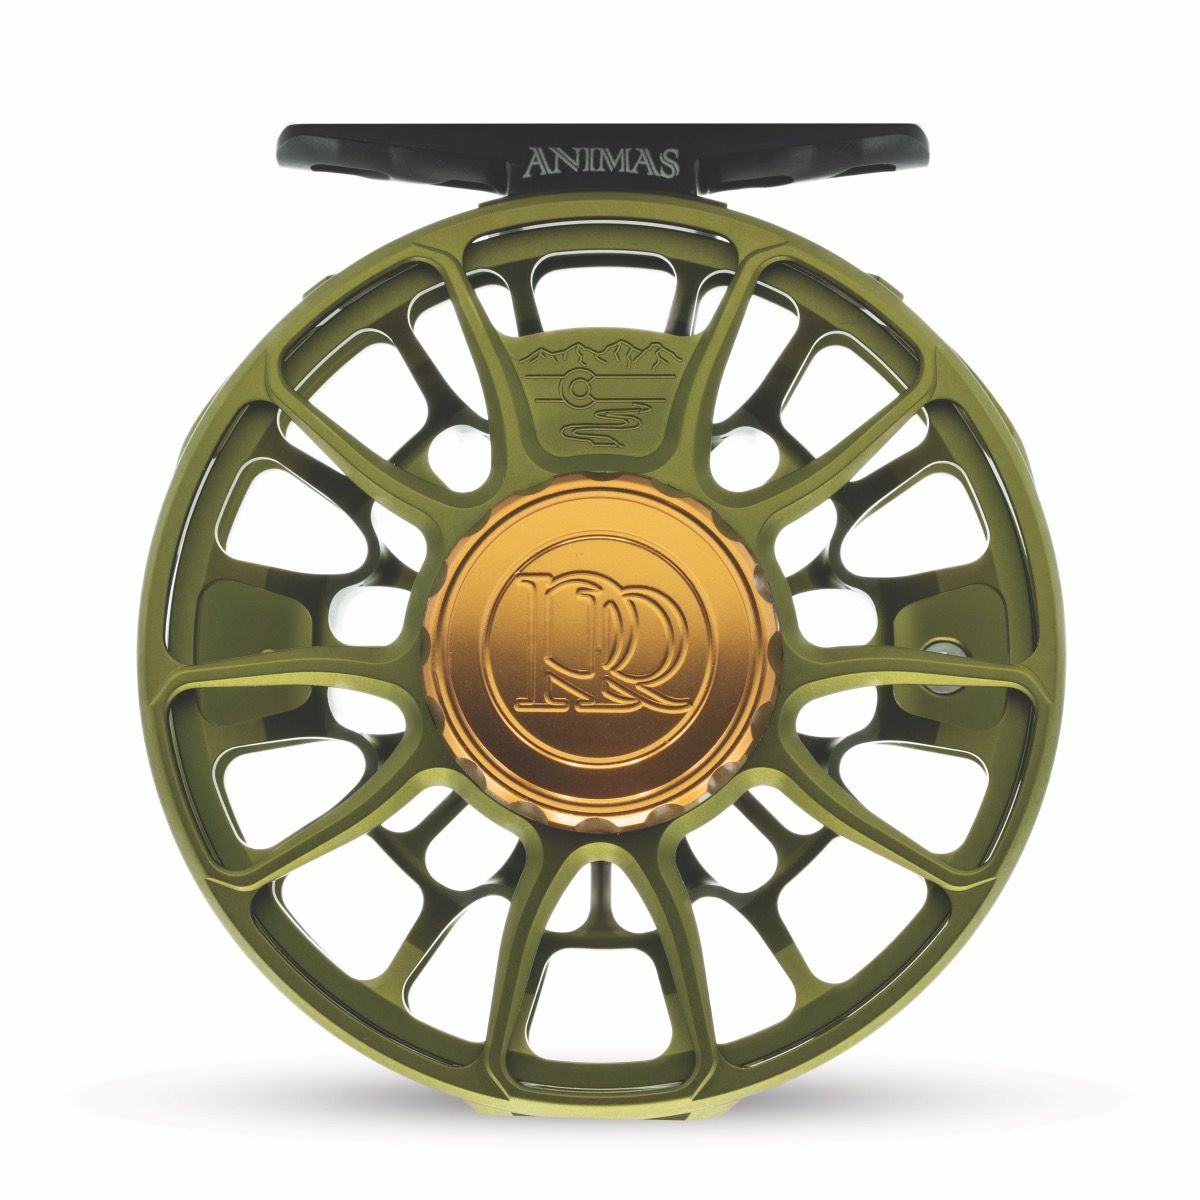 Ross Animas Matte Olive Fly Reel - NEW Color!